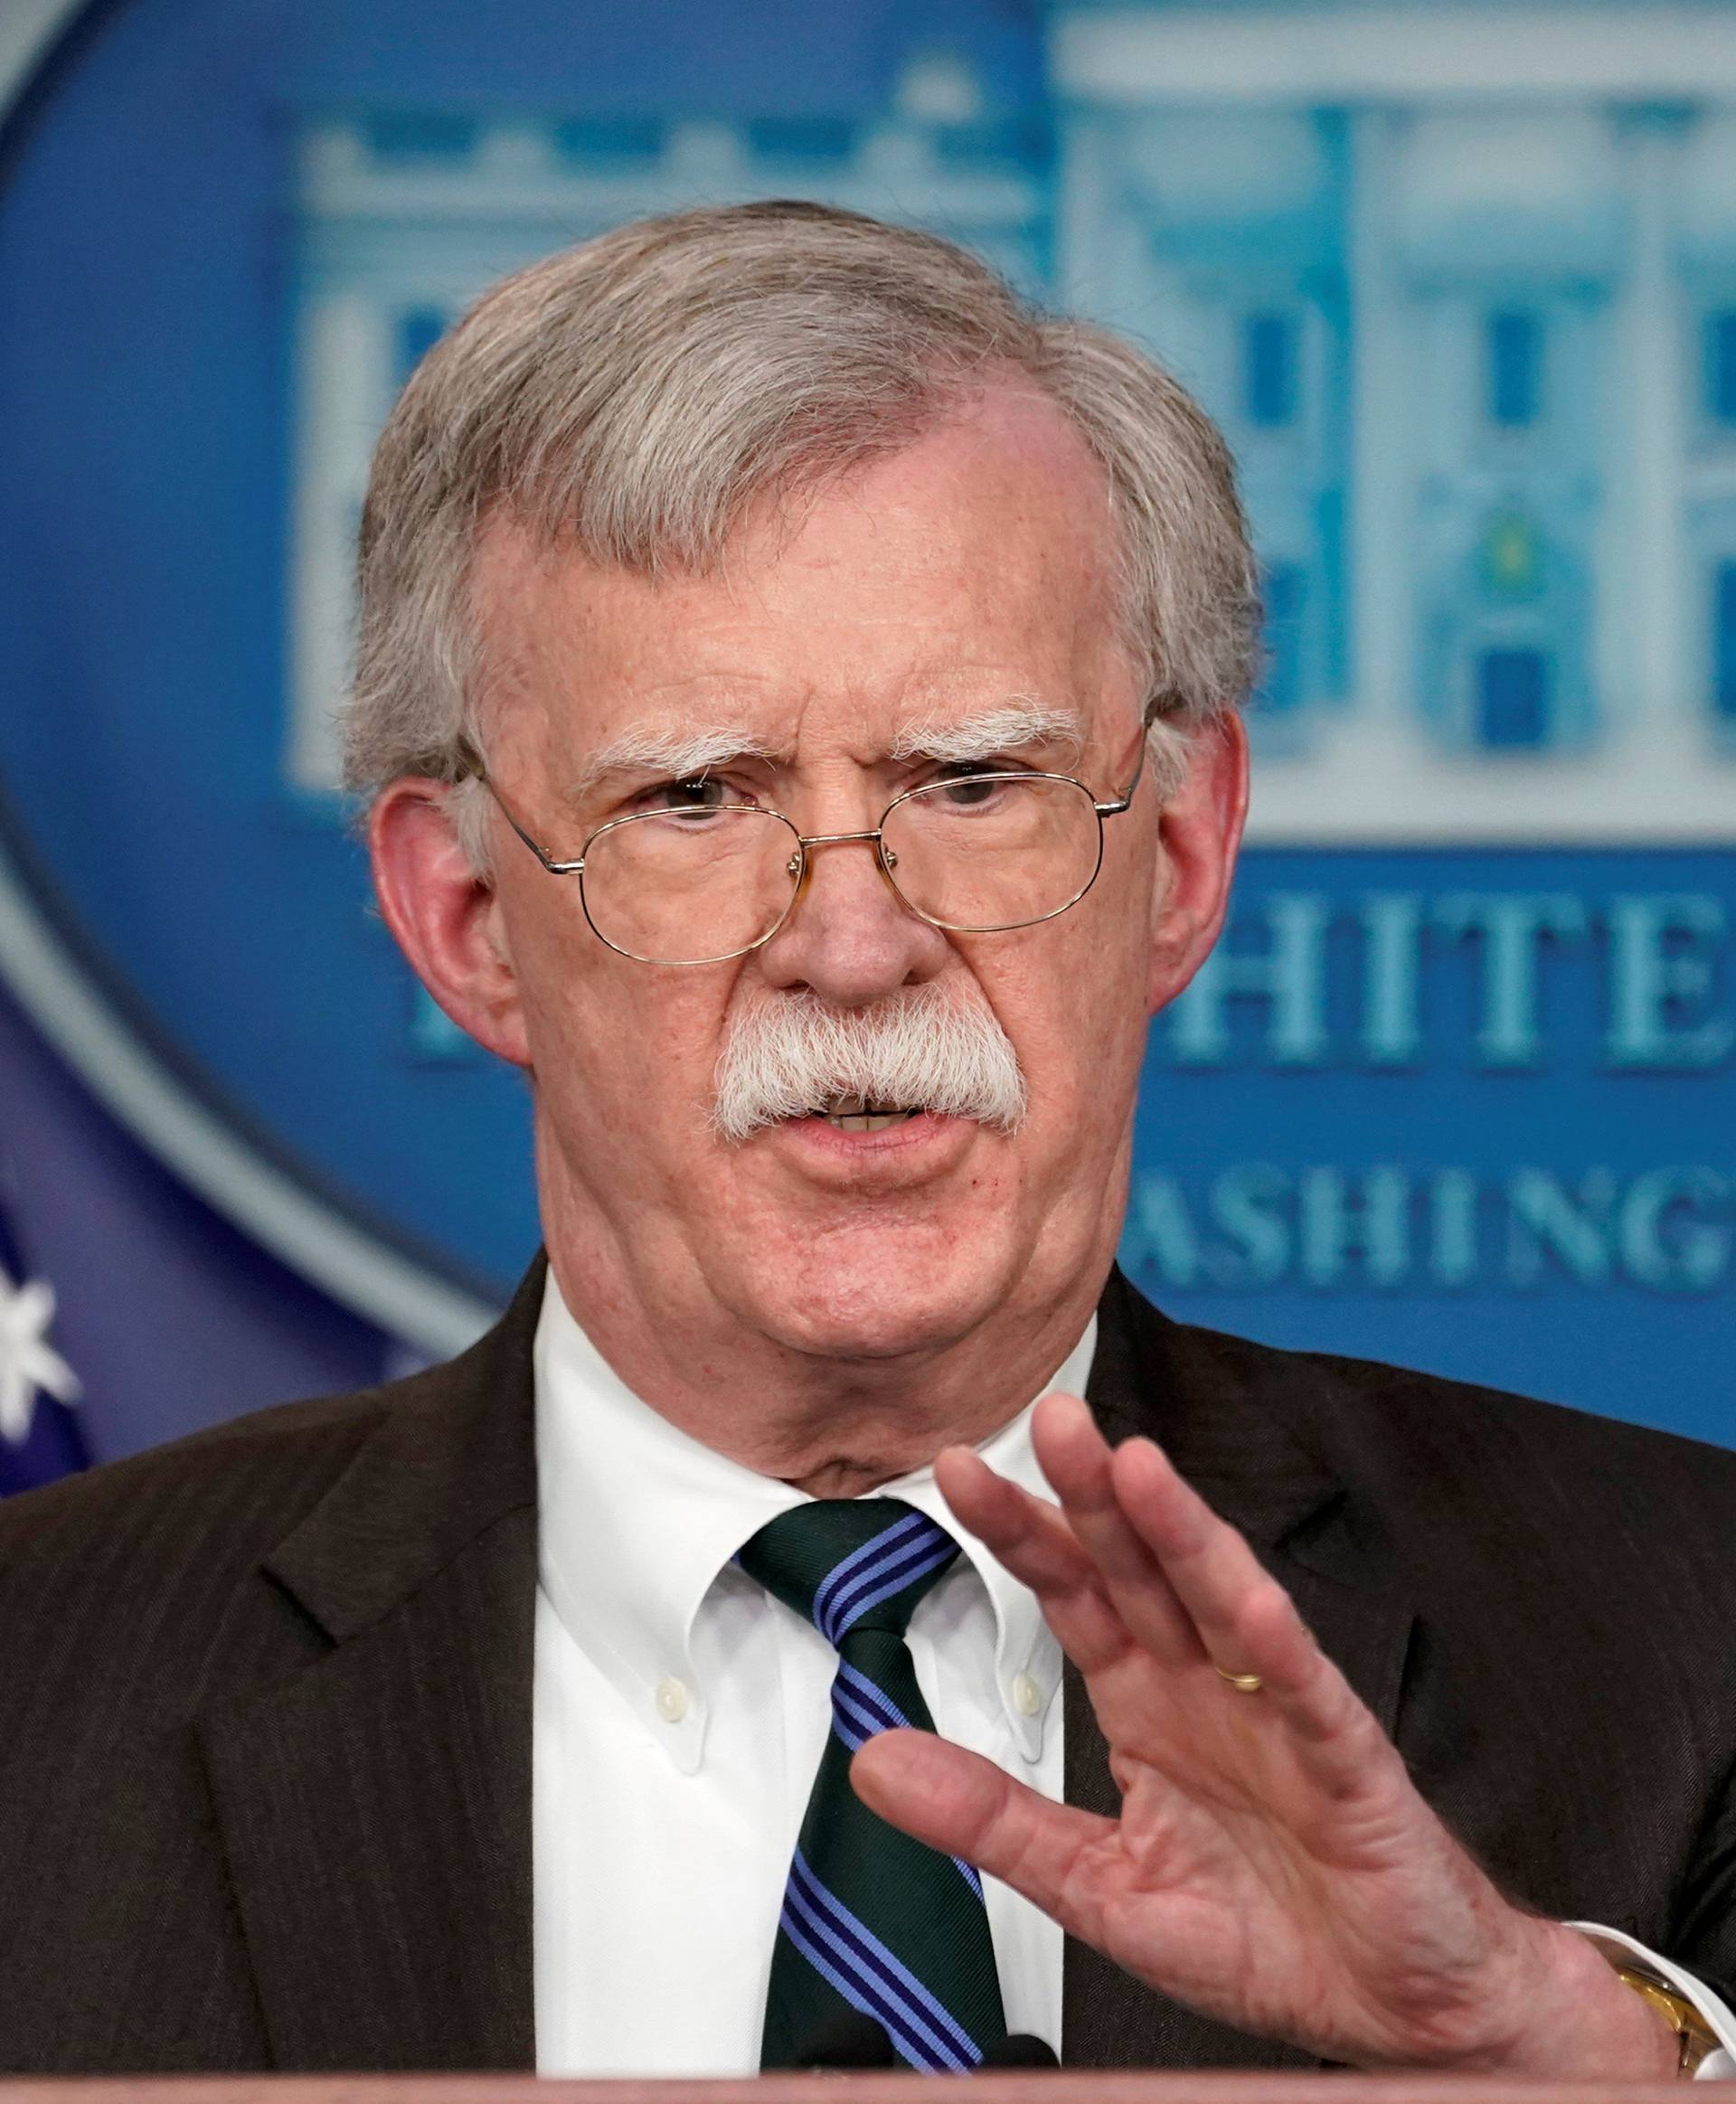 FILE PHOTO: Bolton speaks during a press briefing at the White House in Washington